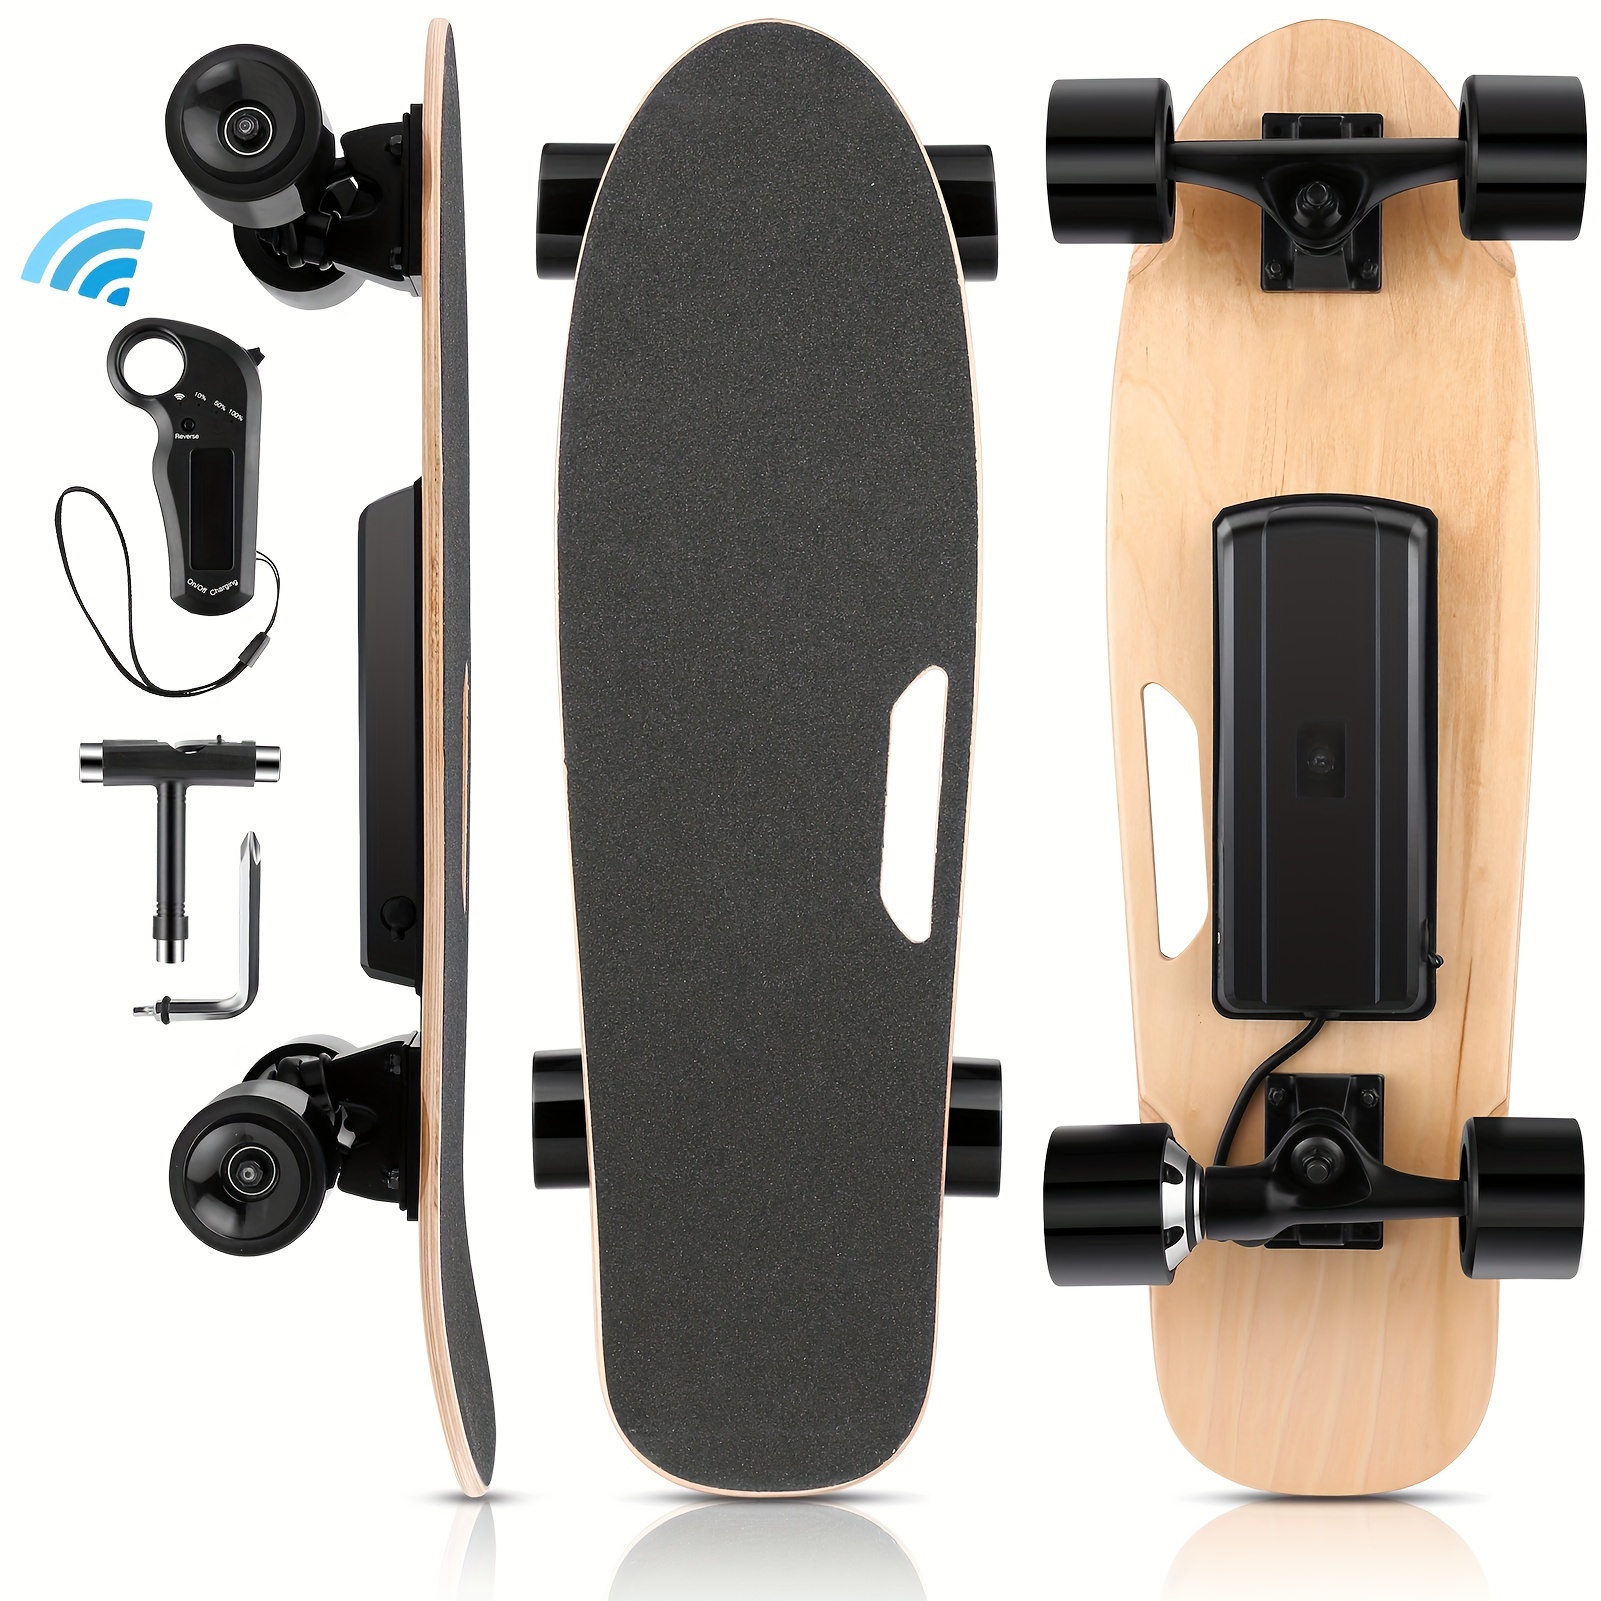 

Caroma 1pc 350w Electric Skateboard With Remote, 12.4 Mph Top Speed & 8 Miles Range, Electric Longboard, Built-in Intelligent Bms